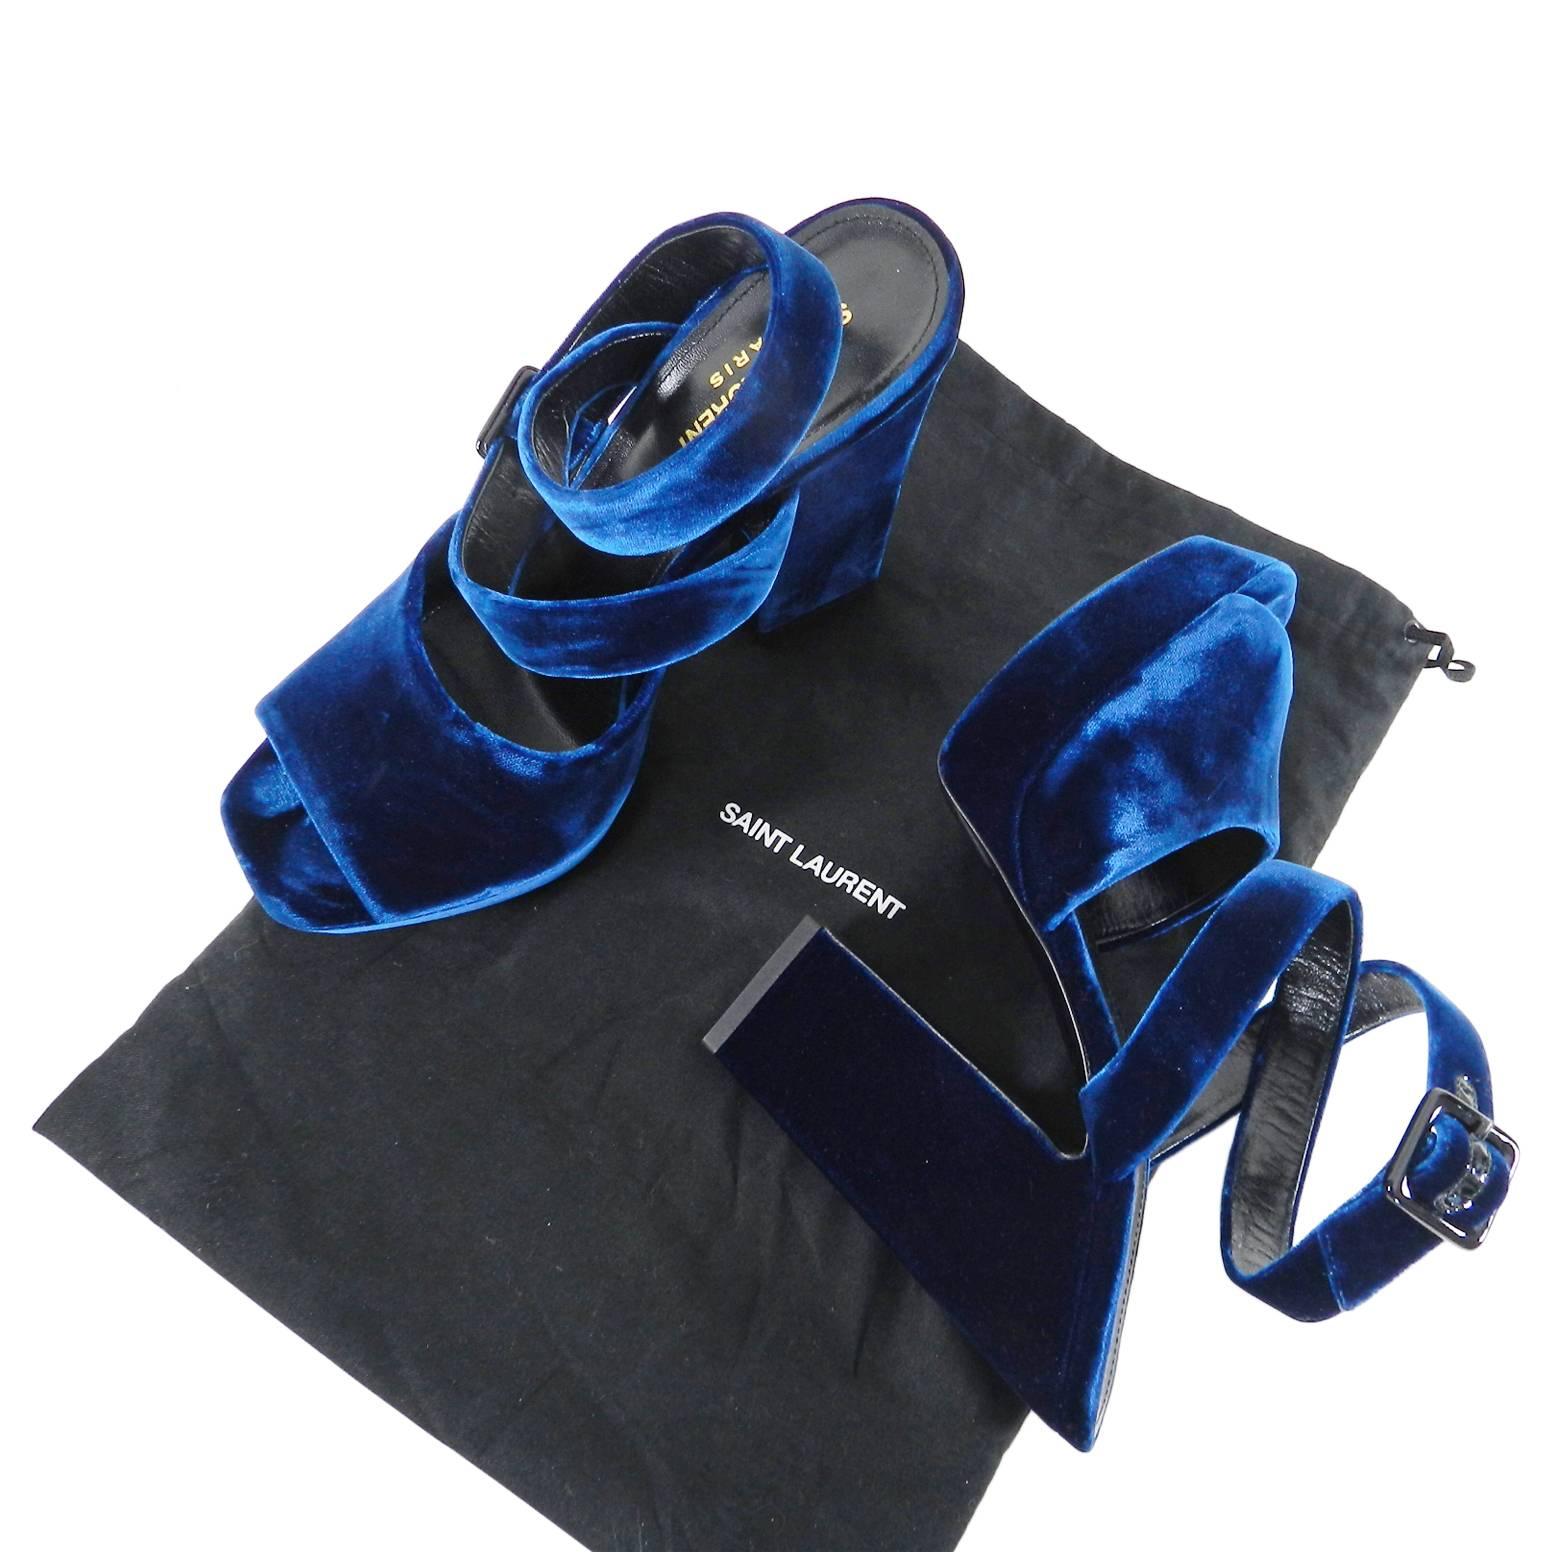 Saint Laurent Blue Velvet Debbie Platform Sandals.  Midnight blue soft velvet with thick structured heel and wrap-around ankle strap accented with black patent leather trimmed buckle. 5” heel. Marked size 39 ½ (USA 9). Original price $995 USD.